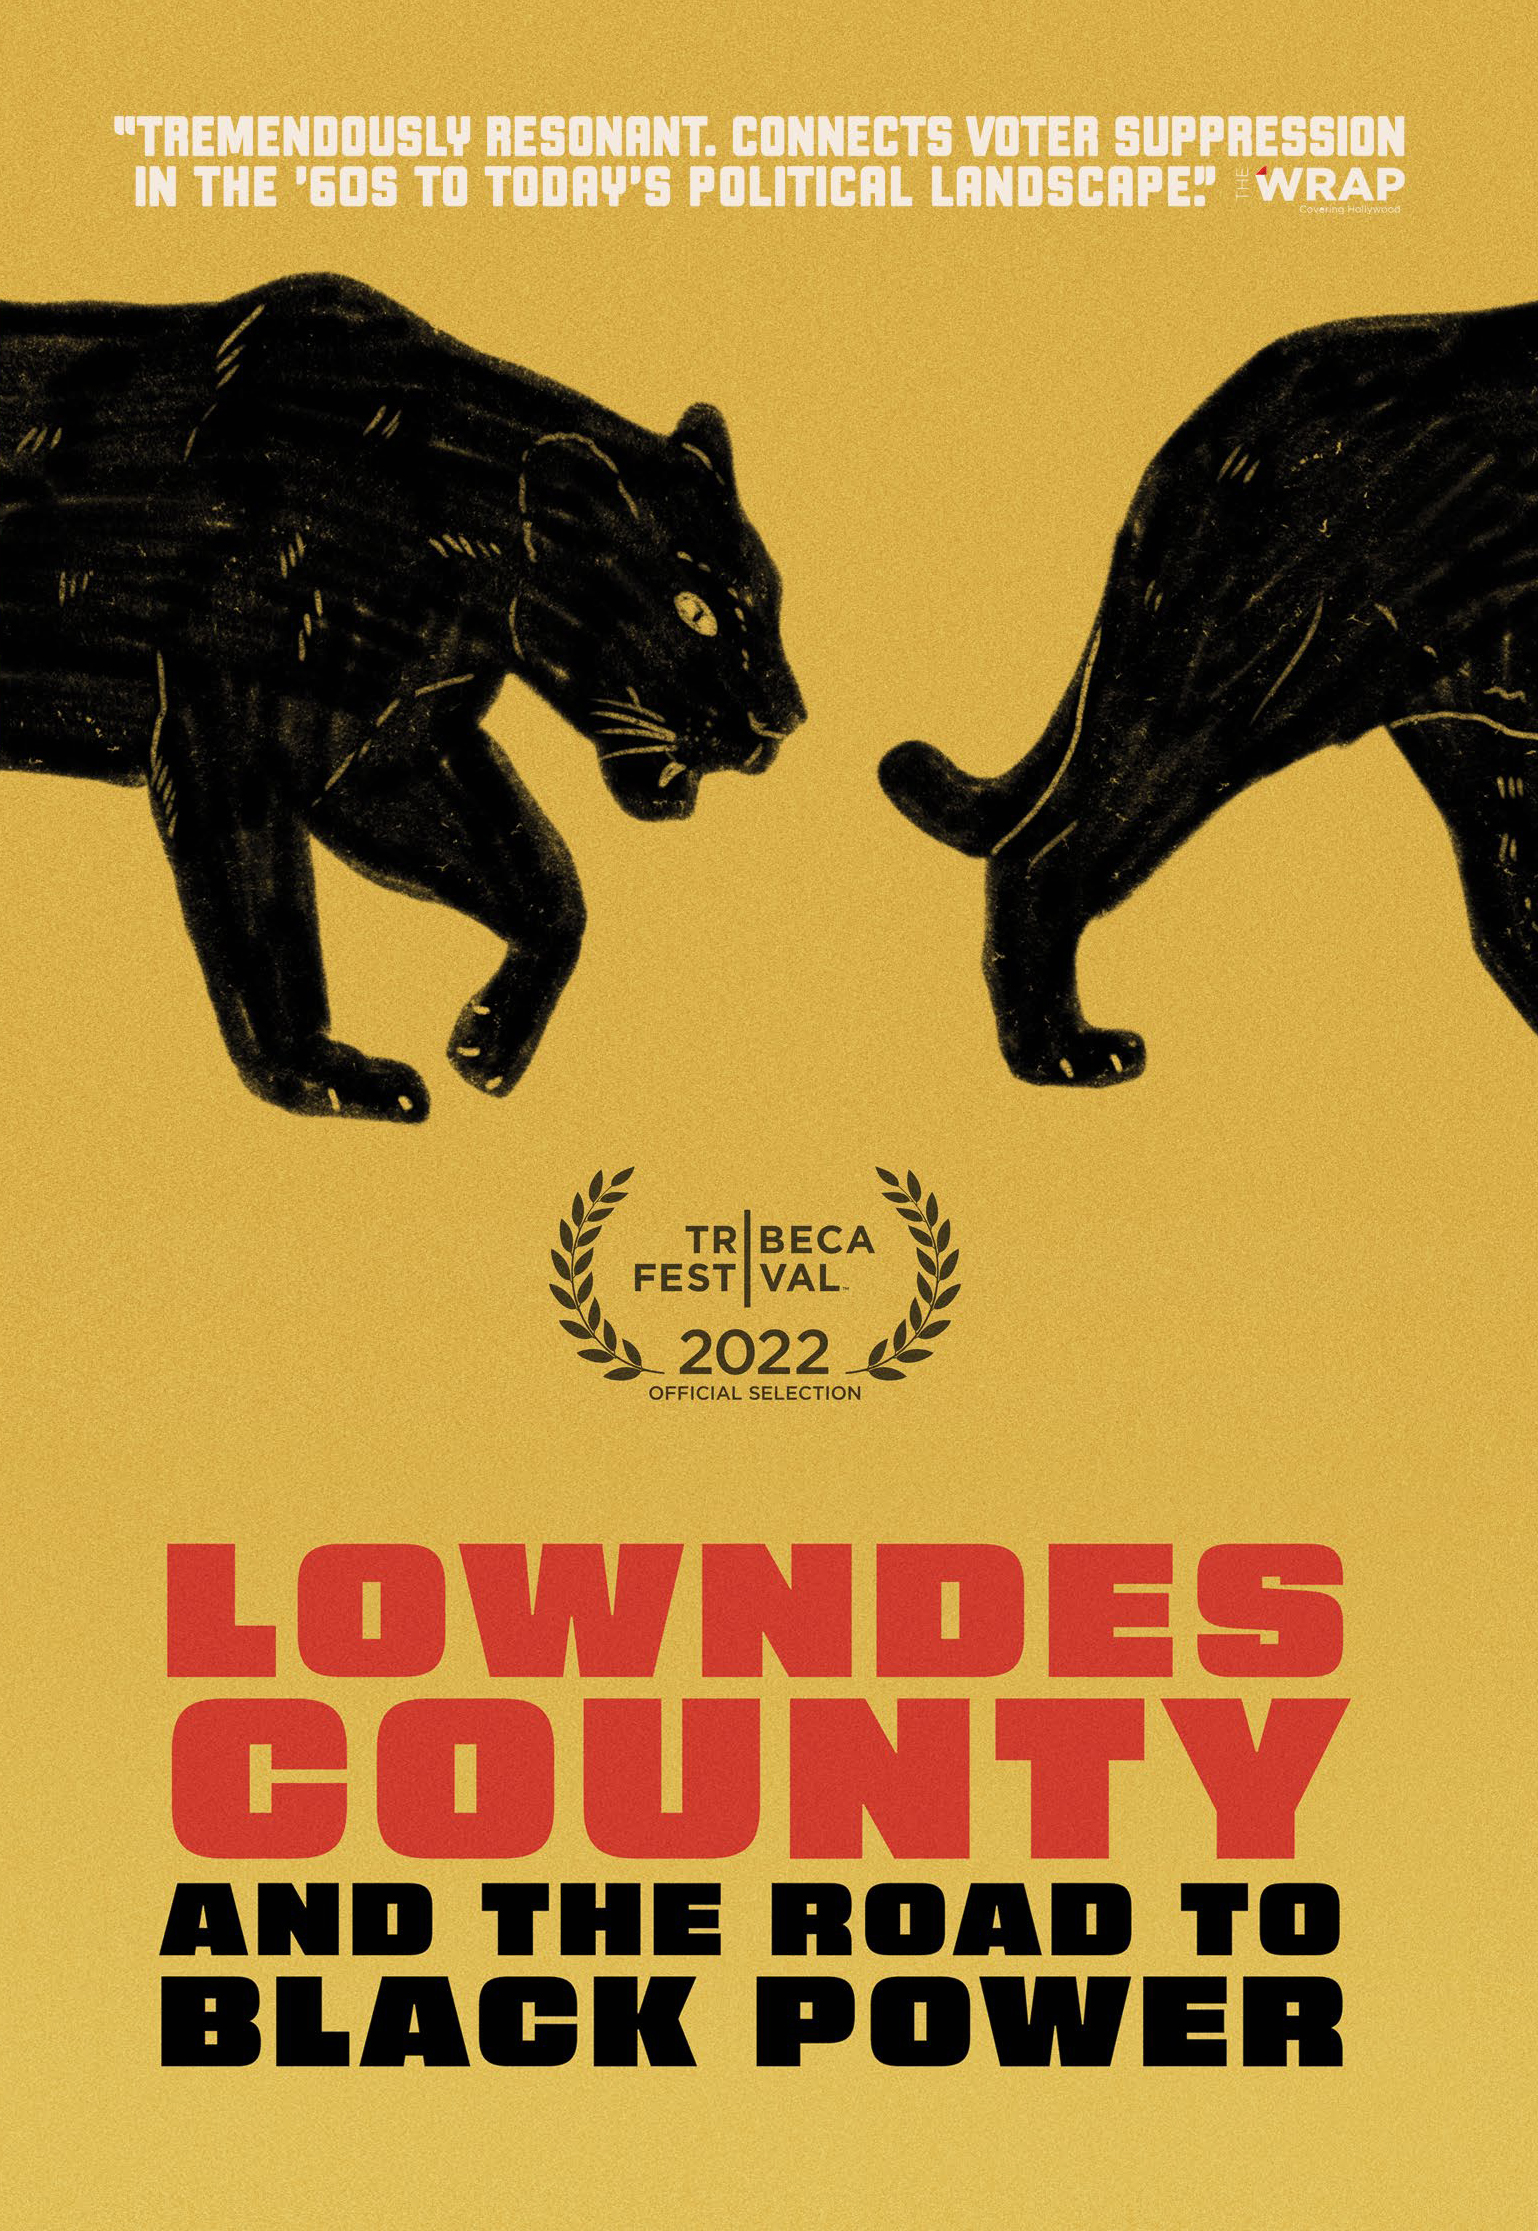 kunst Bortset Stuepige Lowndes County and the Road to Black Power (DVD) - Kino Lorber Home Video